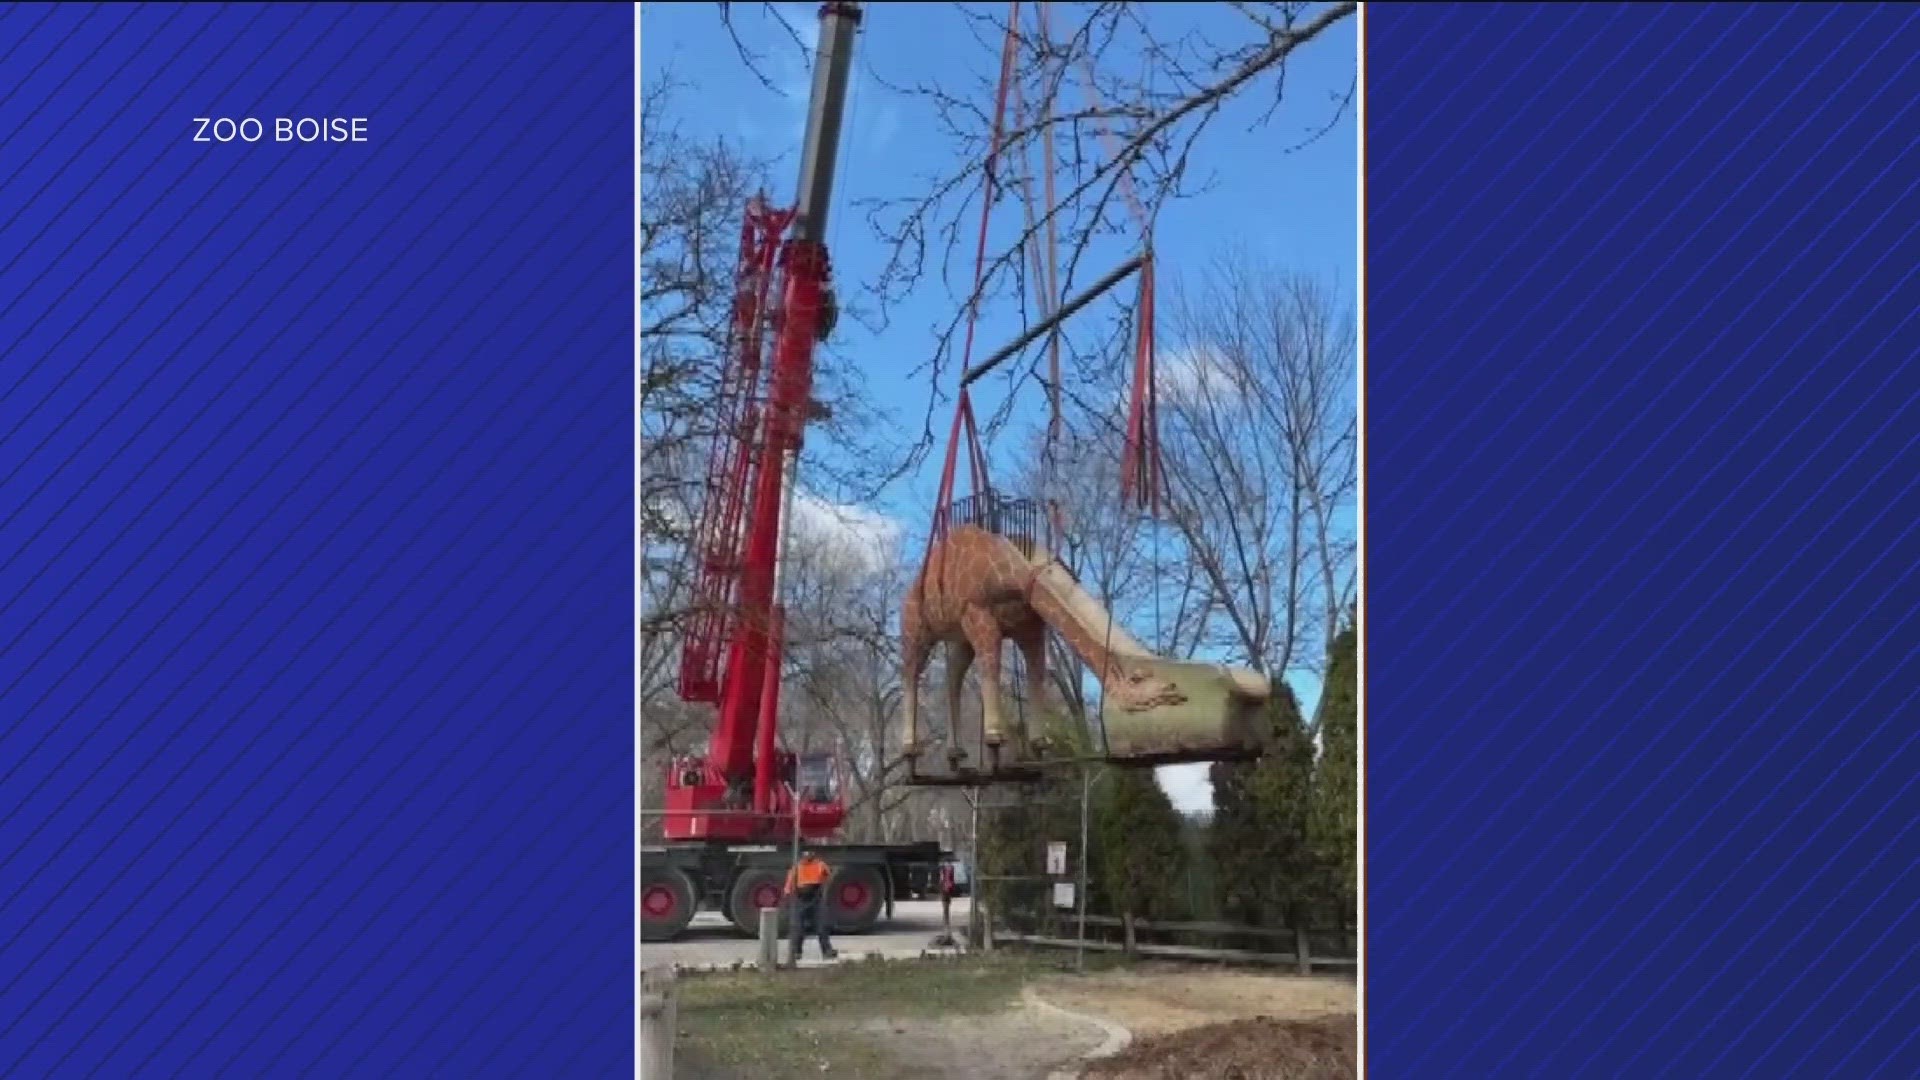 Giving kids a level playing ground, the slide has moved next to the giraffe exhibit. The reopening is April 24.